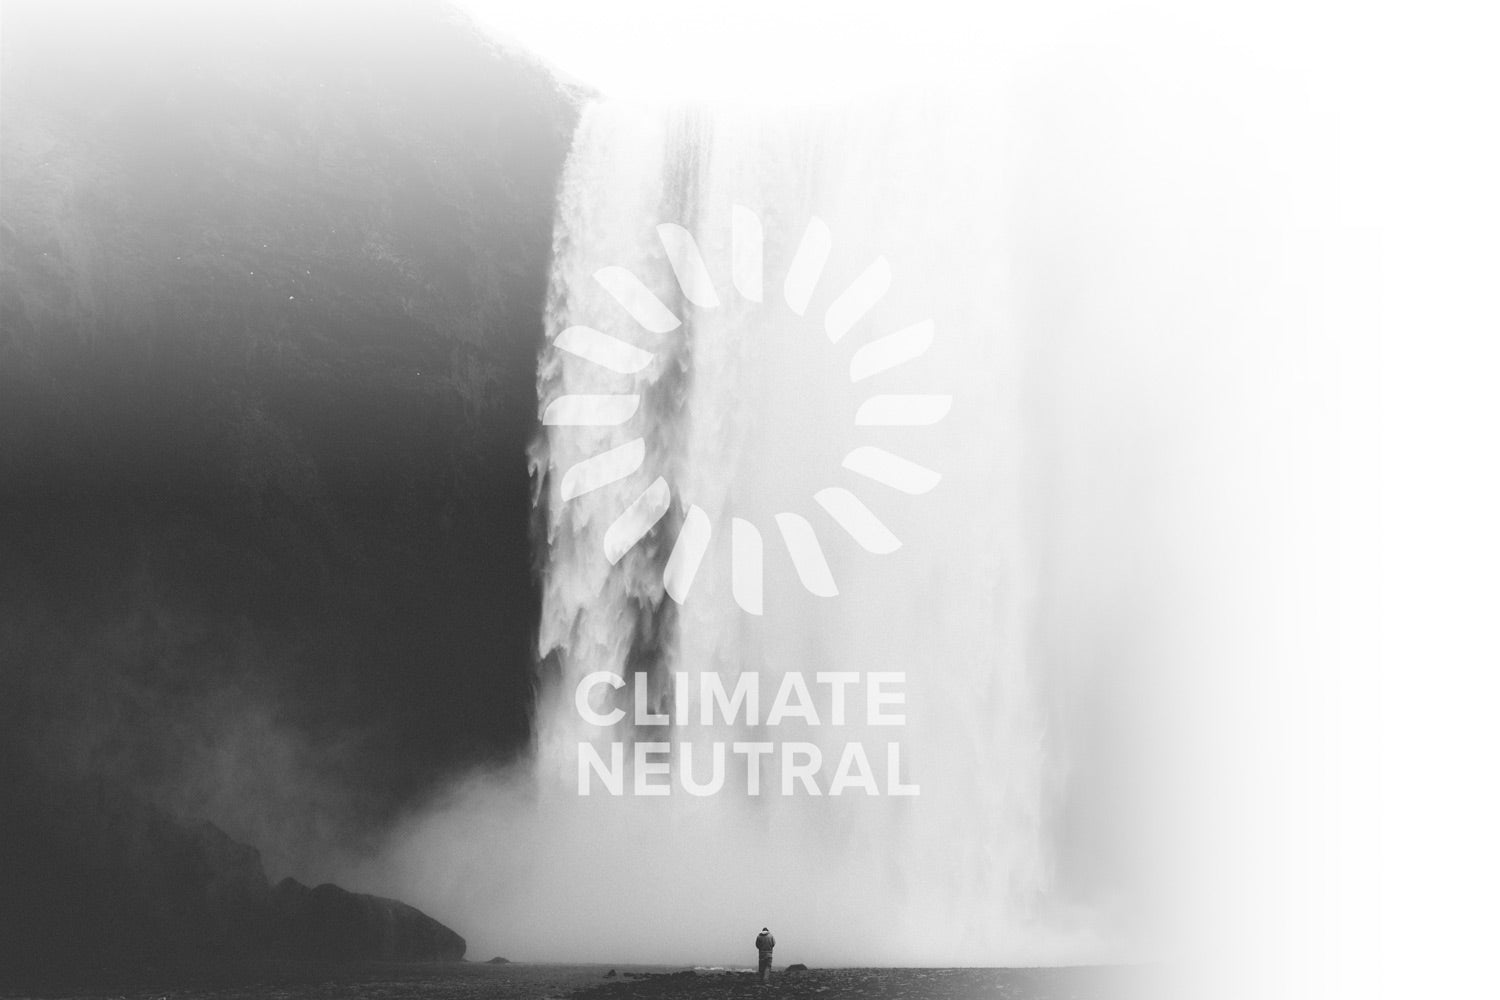 Climate Neutral Logo over black and white waterfall image